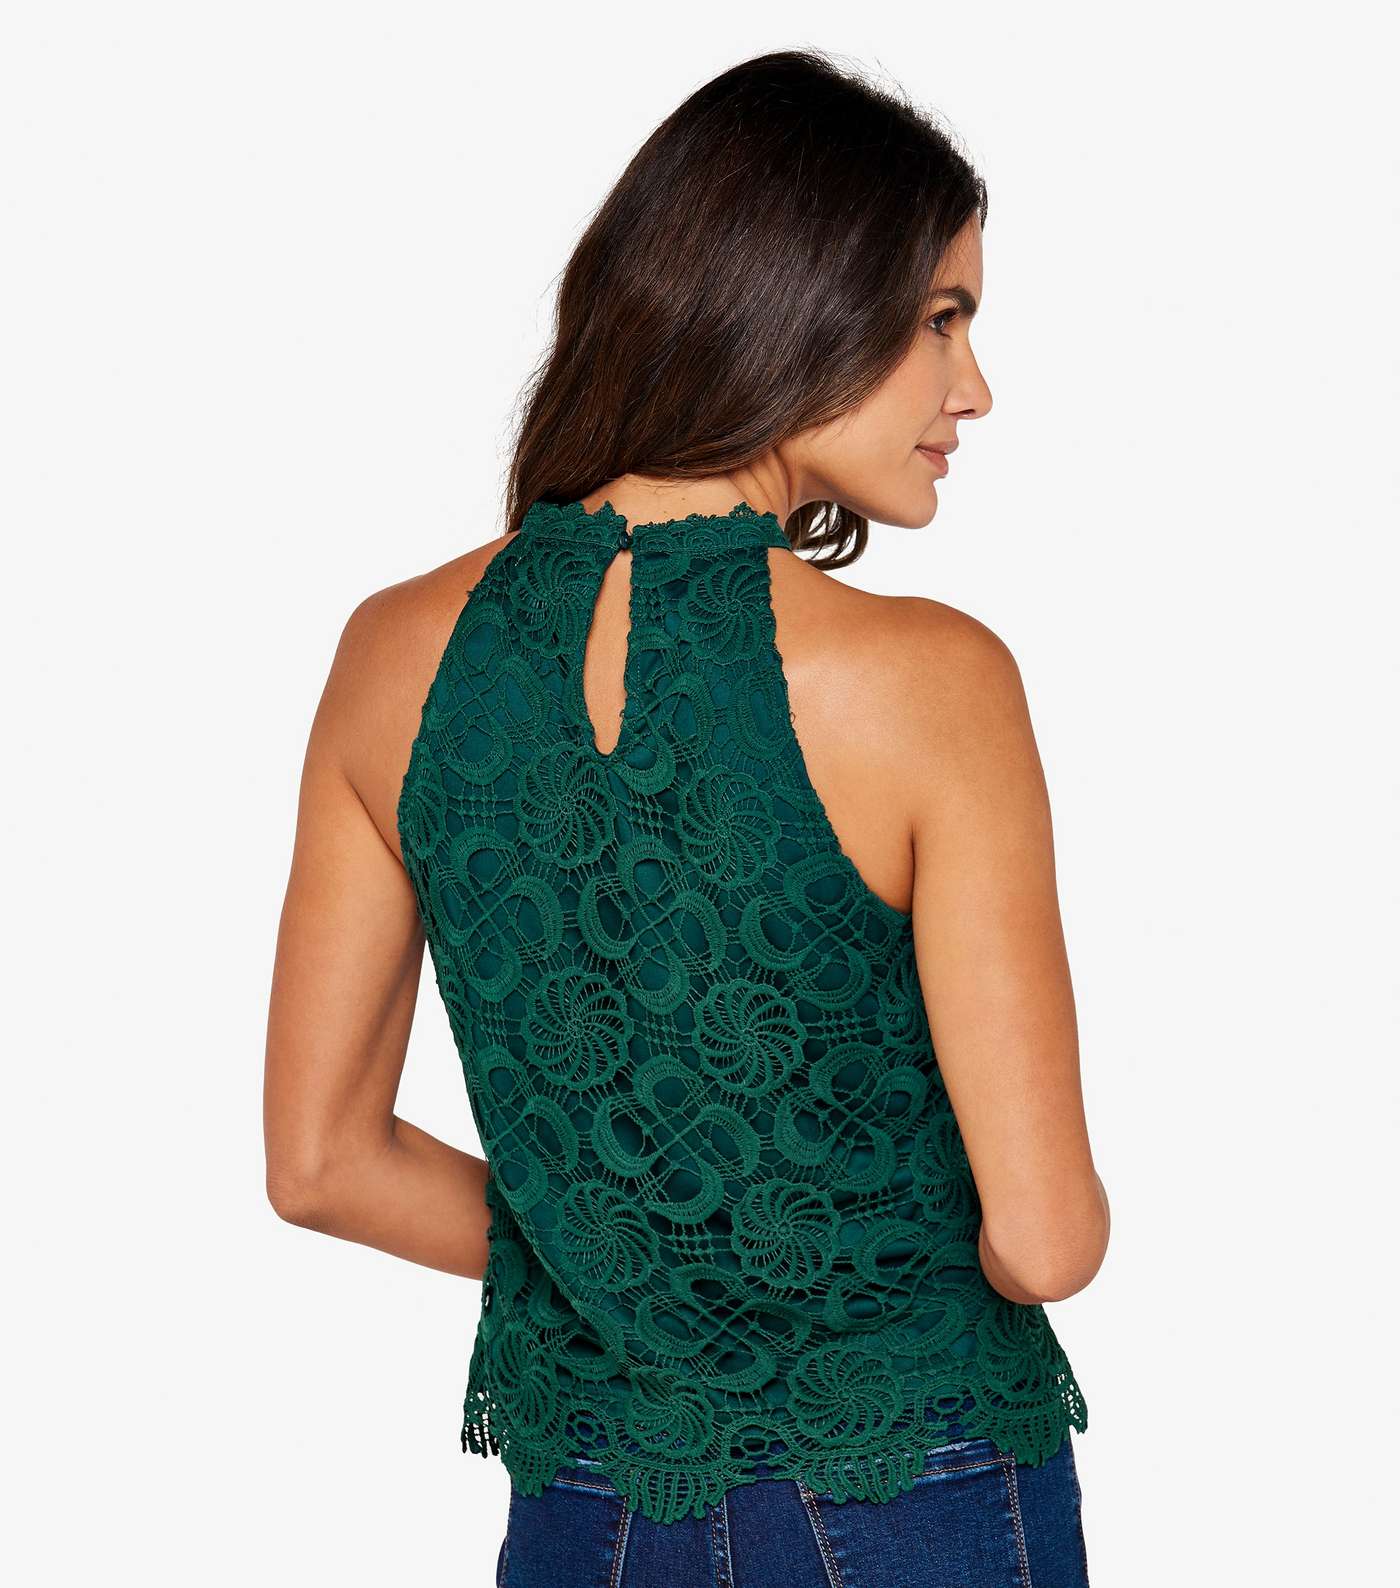 Apricot Dark Green Lace High Neck Sleeveless Top Image 3